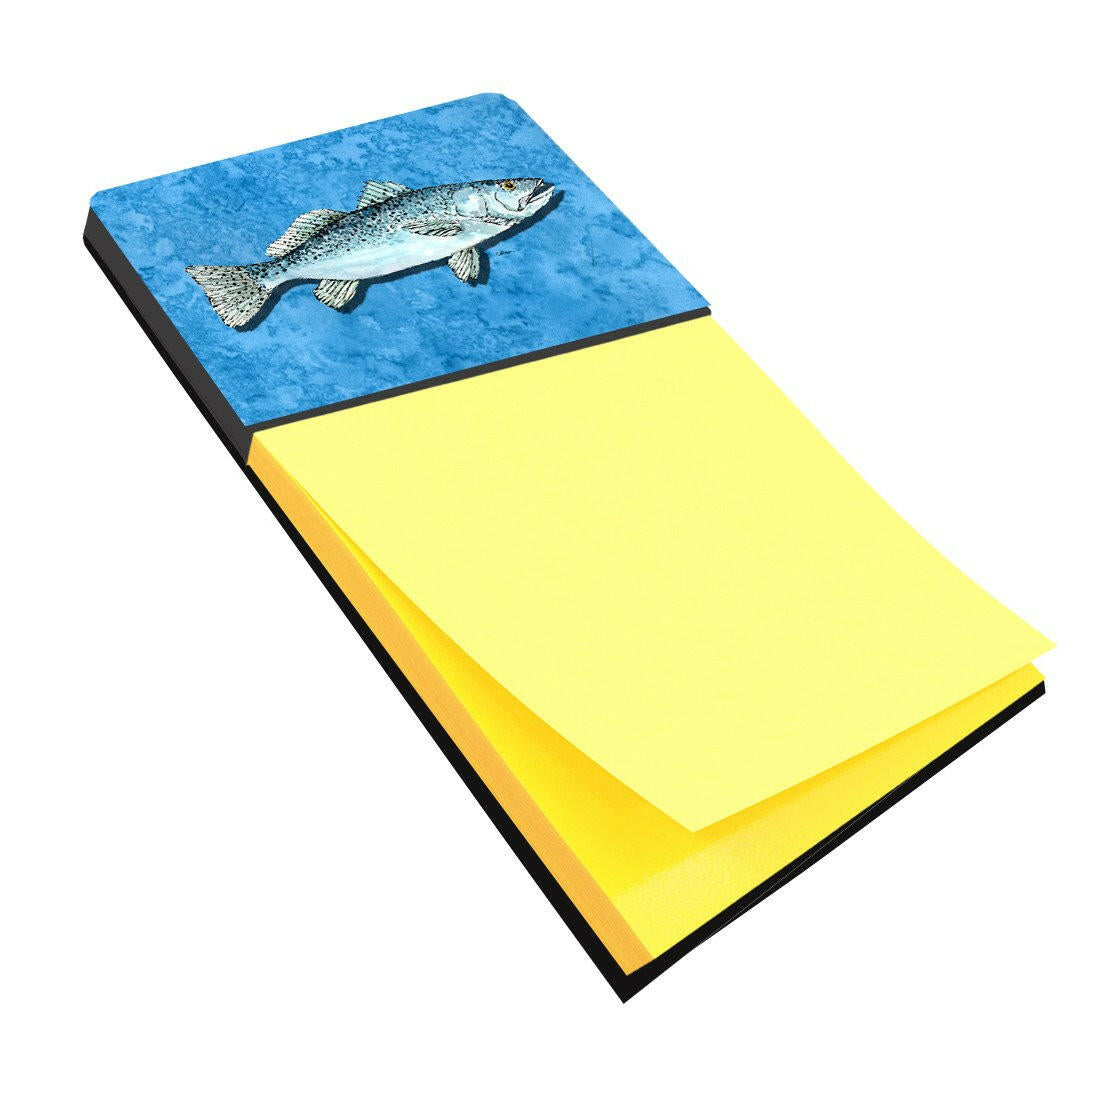 Fish - Trout Refiillable Sticky Note Holder or Postit Note Dispenser 8770SN by Caroline's Treasures